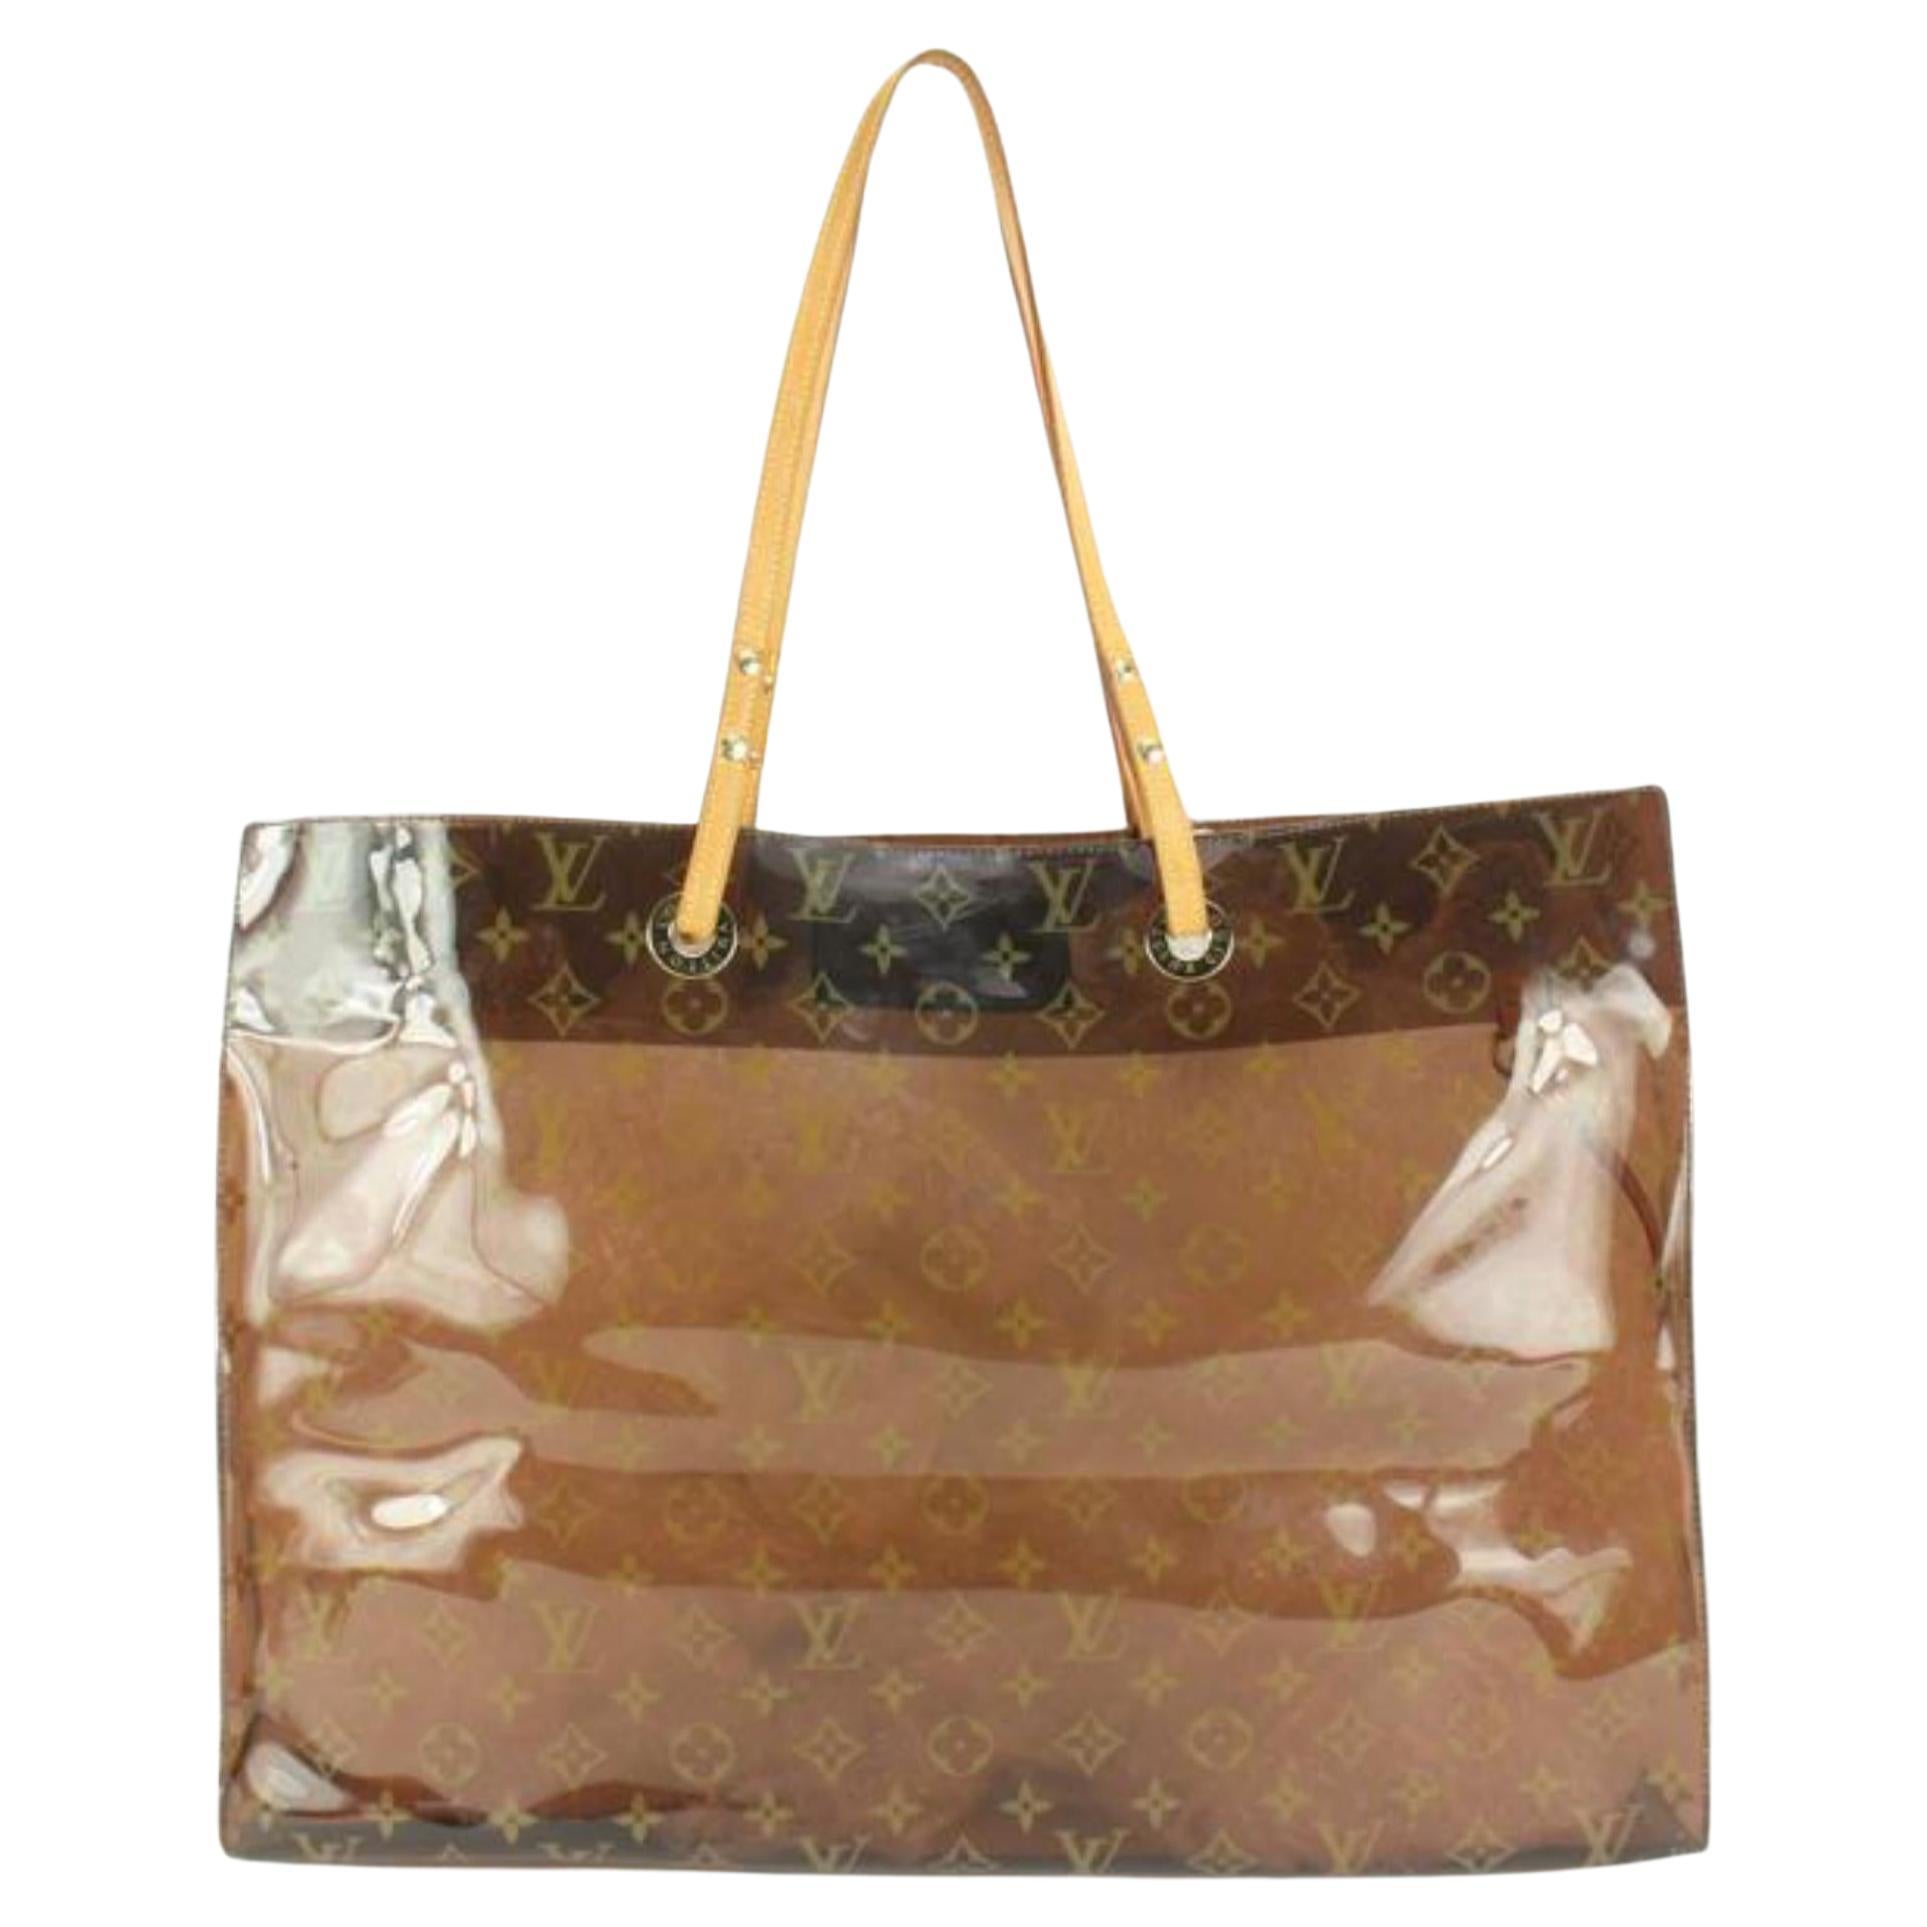 Louis Vuitton Clear Monogram Sac Cabas Cruise Ambre GM Tote Bag with Pouch  240753